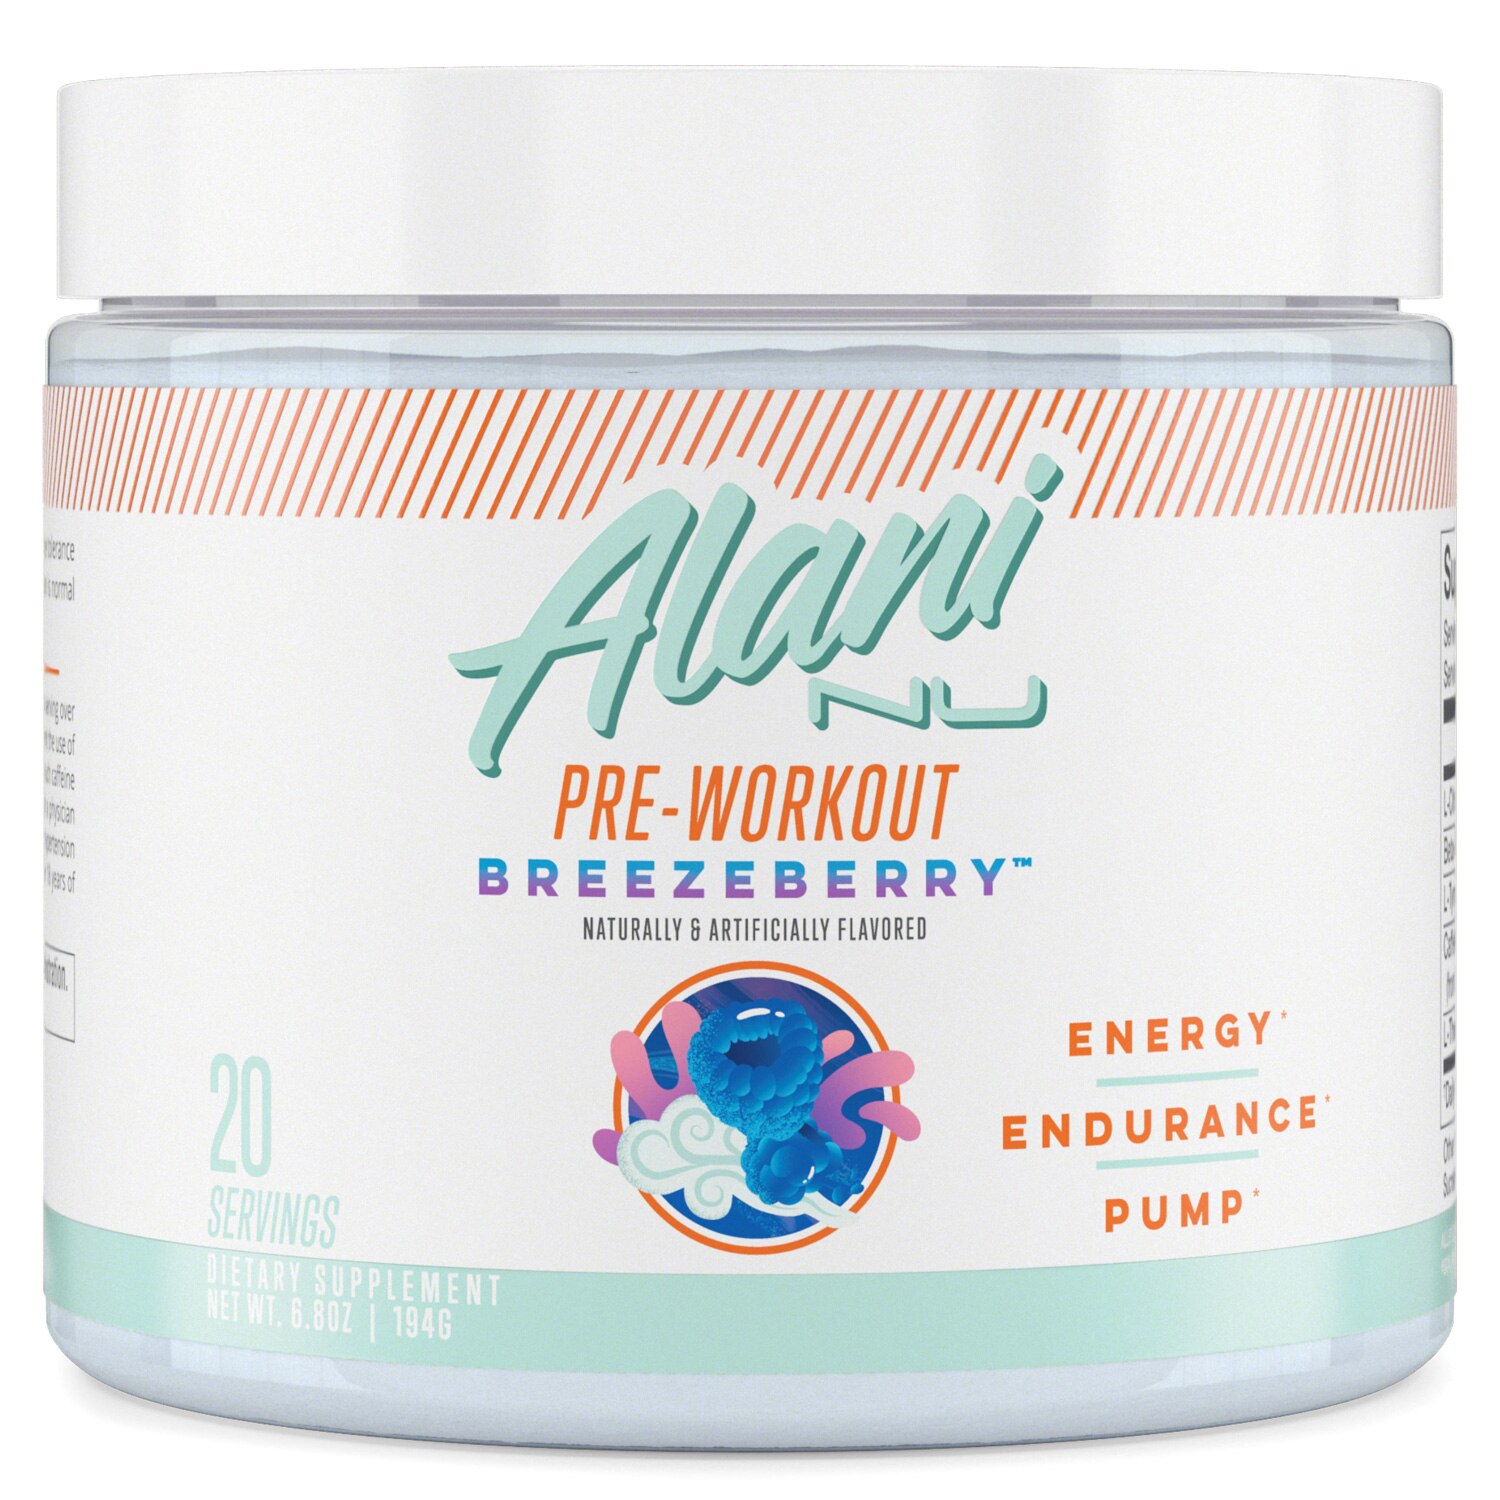 Alani Nu Pre-Workout Supplement Powder for Energy, Endurance, and Pump, 20 Servings